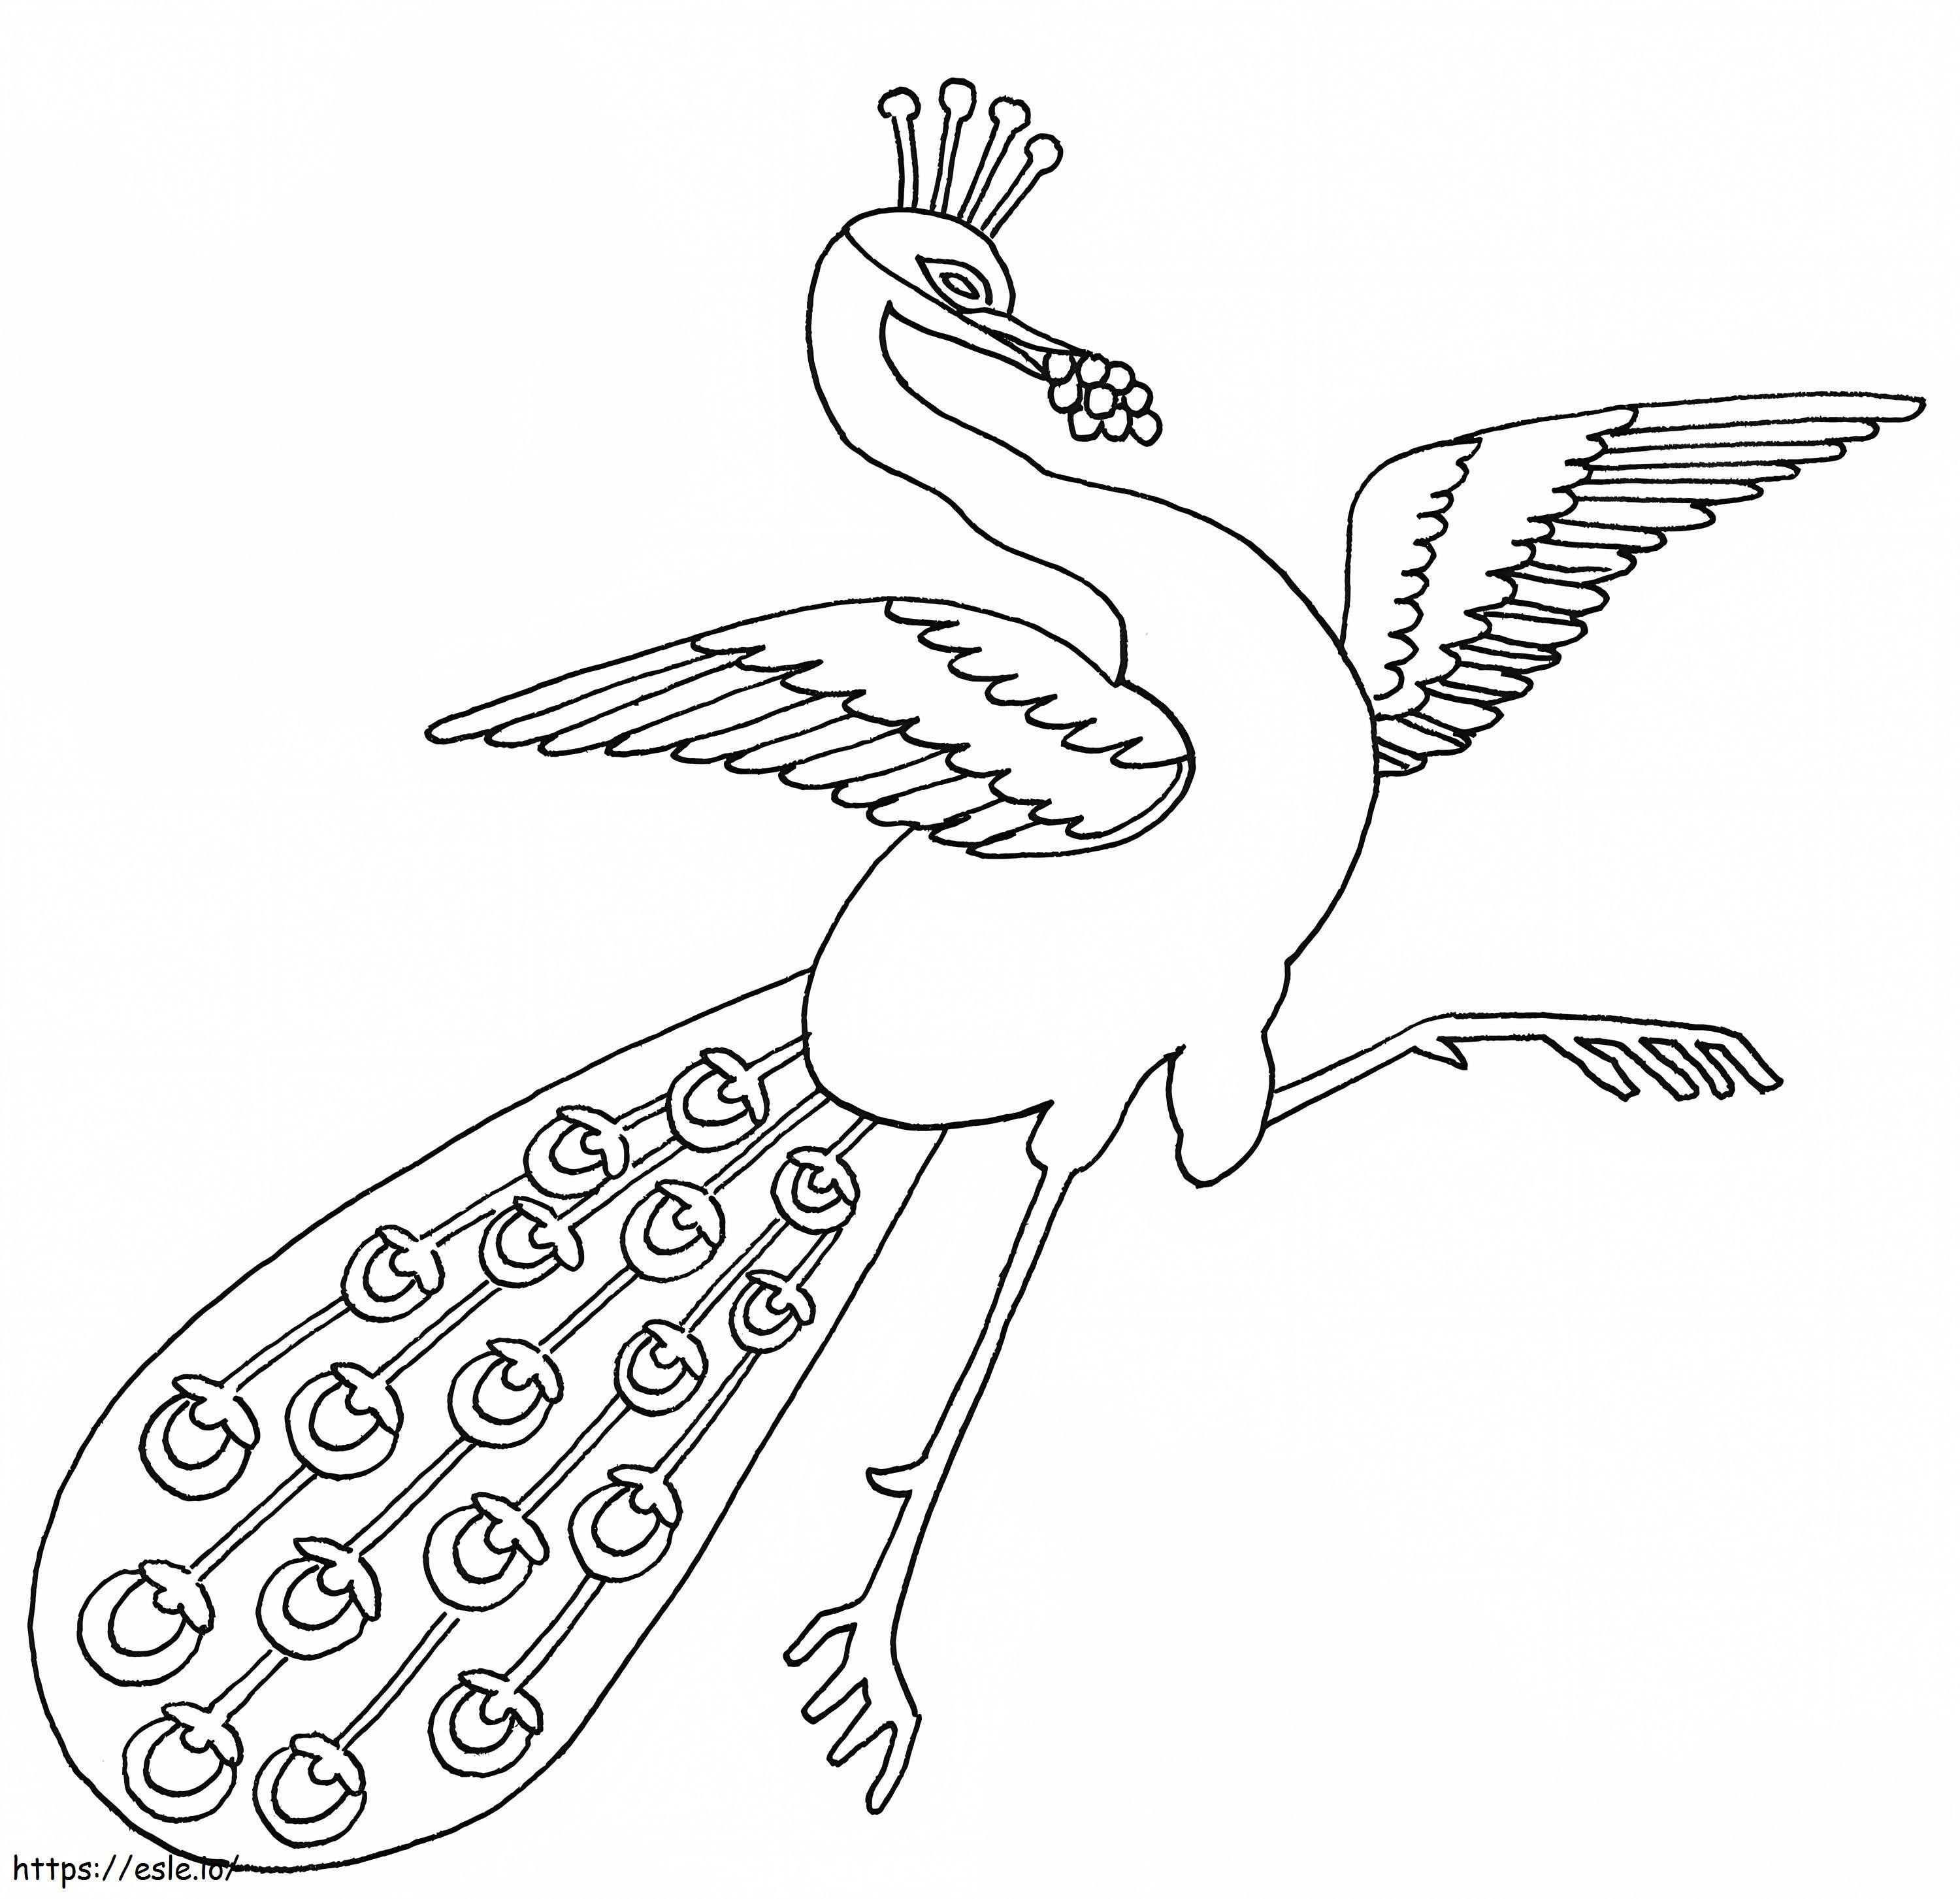 1576466013 Dancing Peacock coloring page